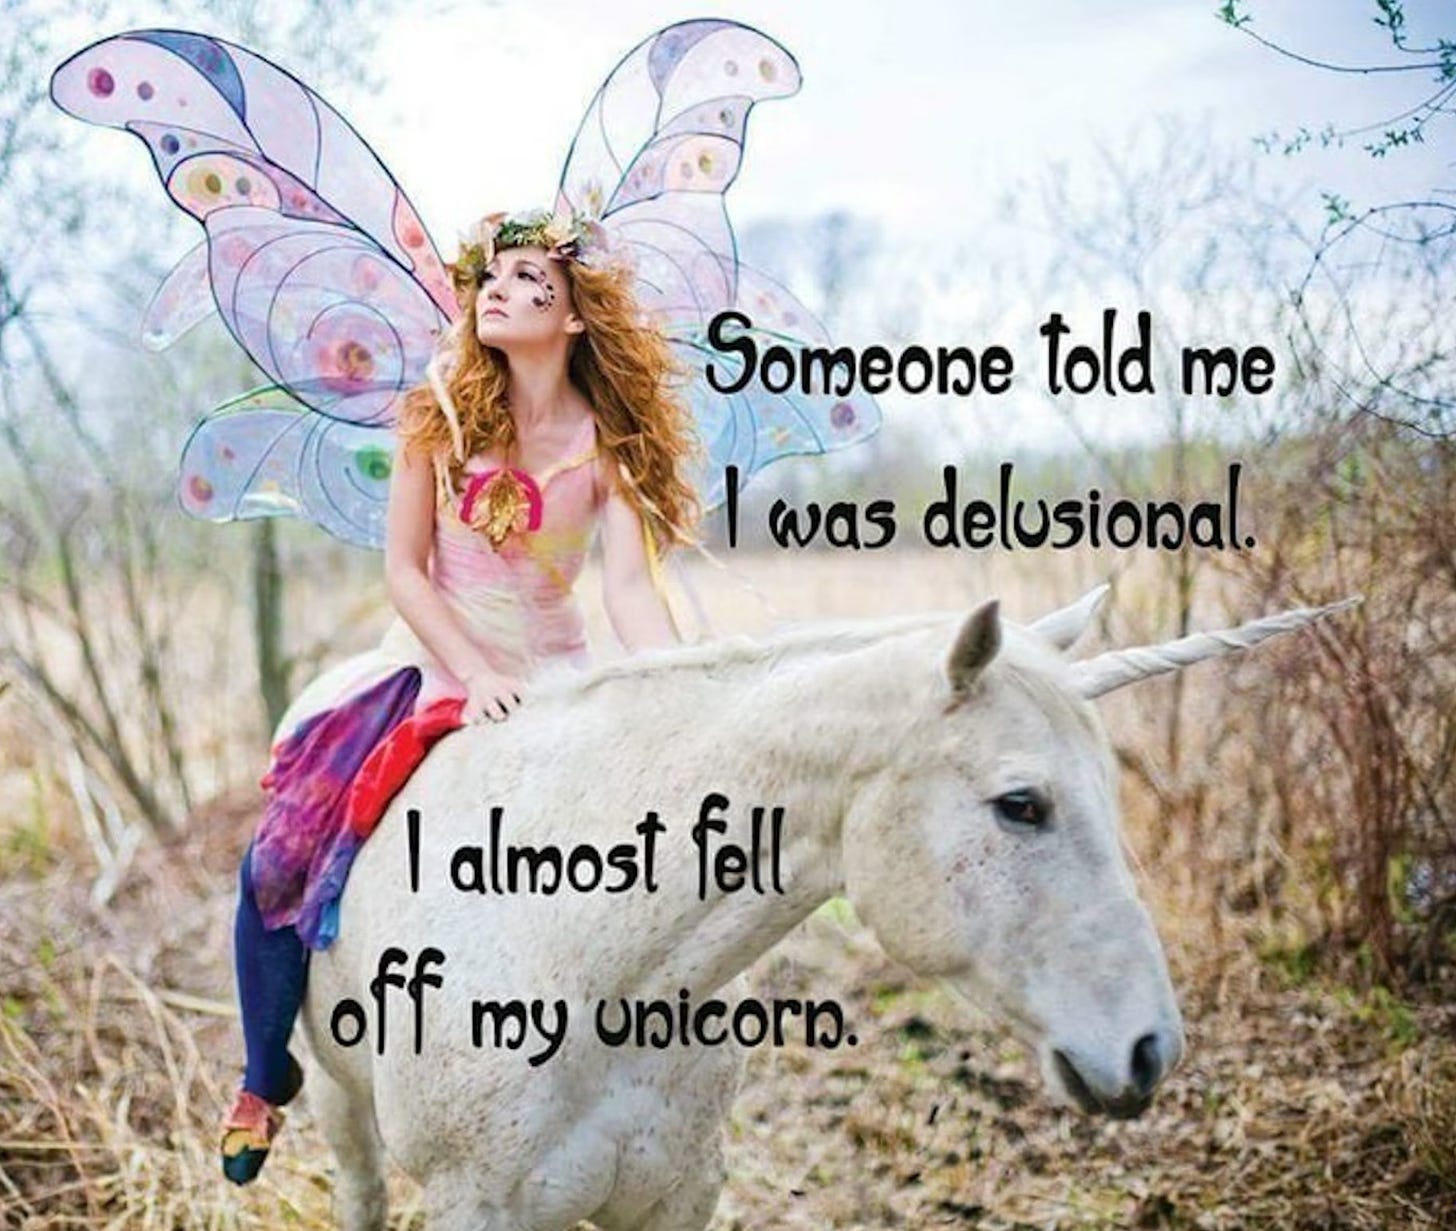 May be an image of 1 person and text that says 'Someone told me was delusional. I almost fell off my unicorn.'